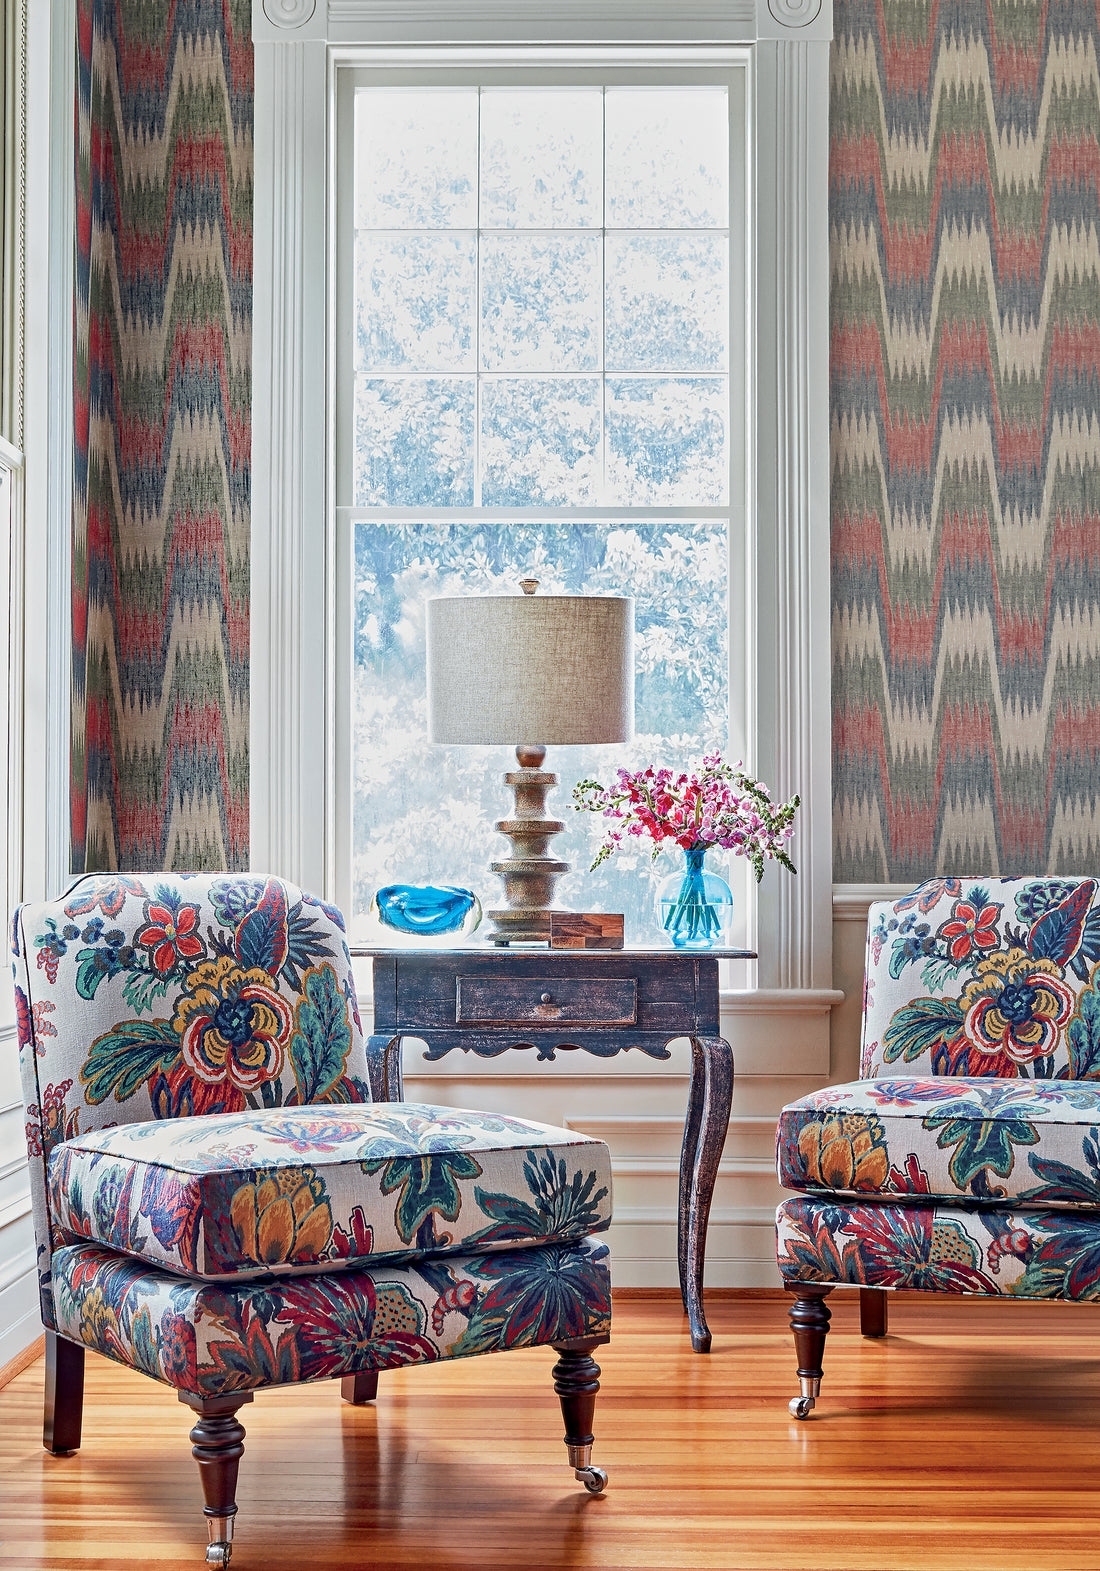 Charlotte chairs in Floral Gala printed fabric in jewel color - pattern number F910216 by Thibaut in the Colony collection